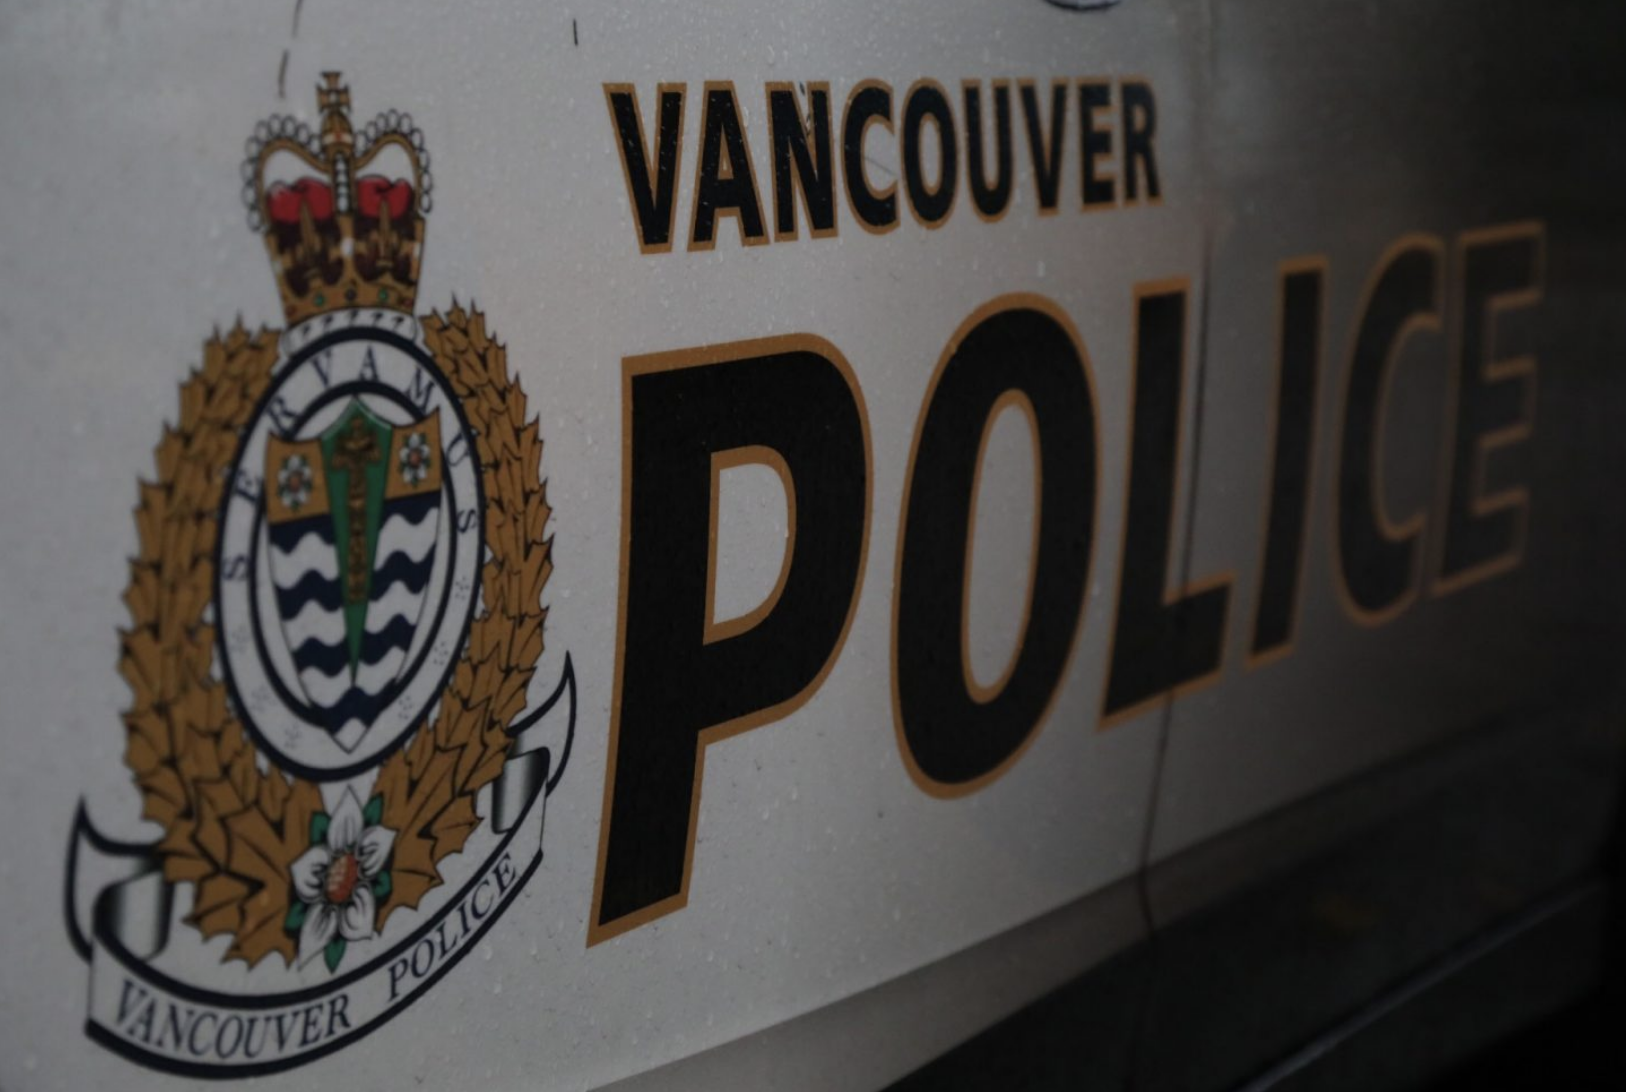 South Asian Man charged with second degree murder for stabbing a man to death in Vancouver